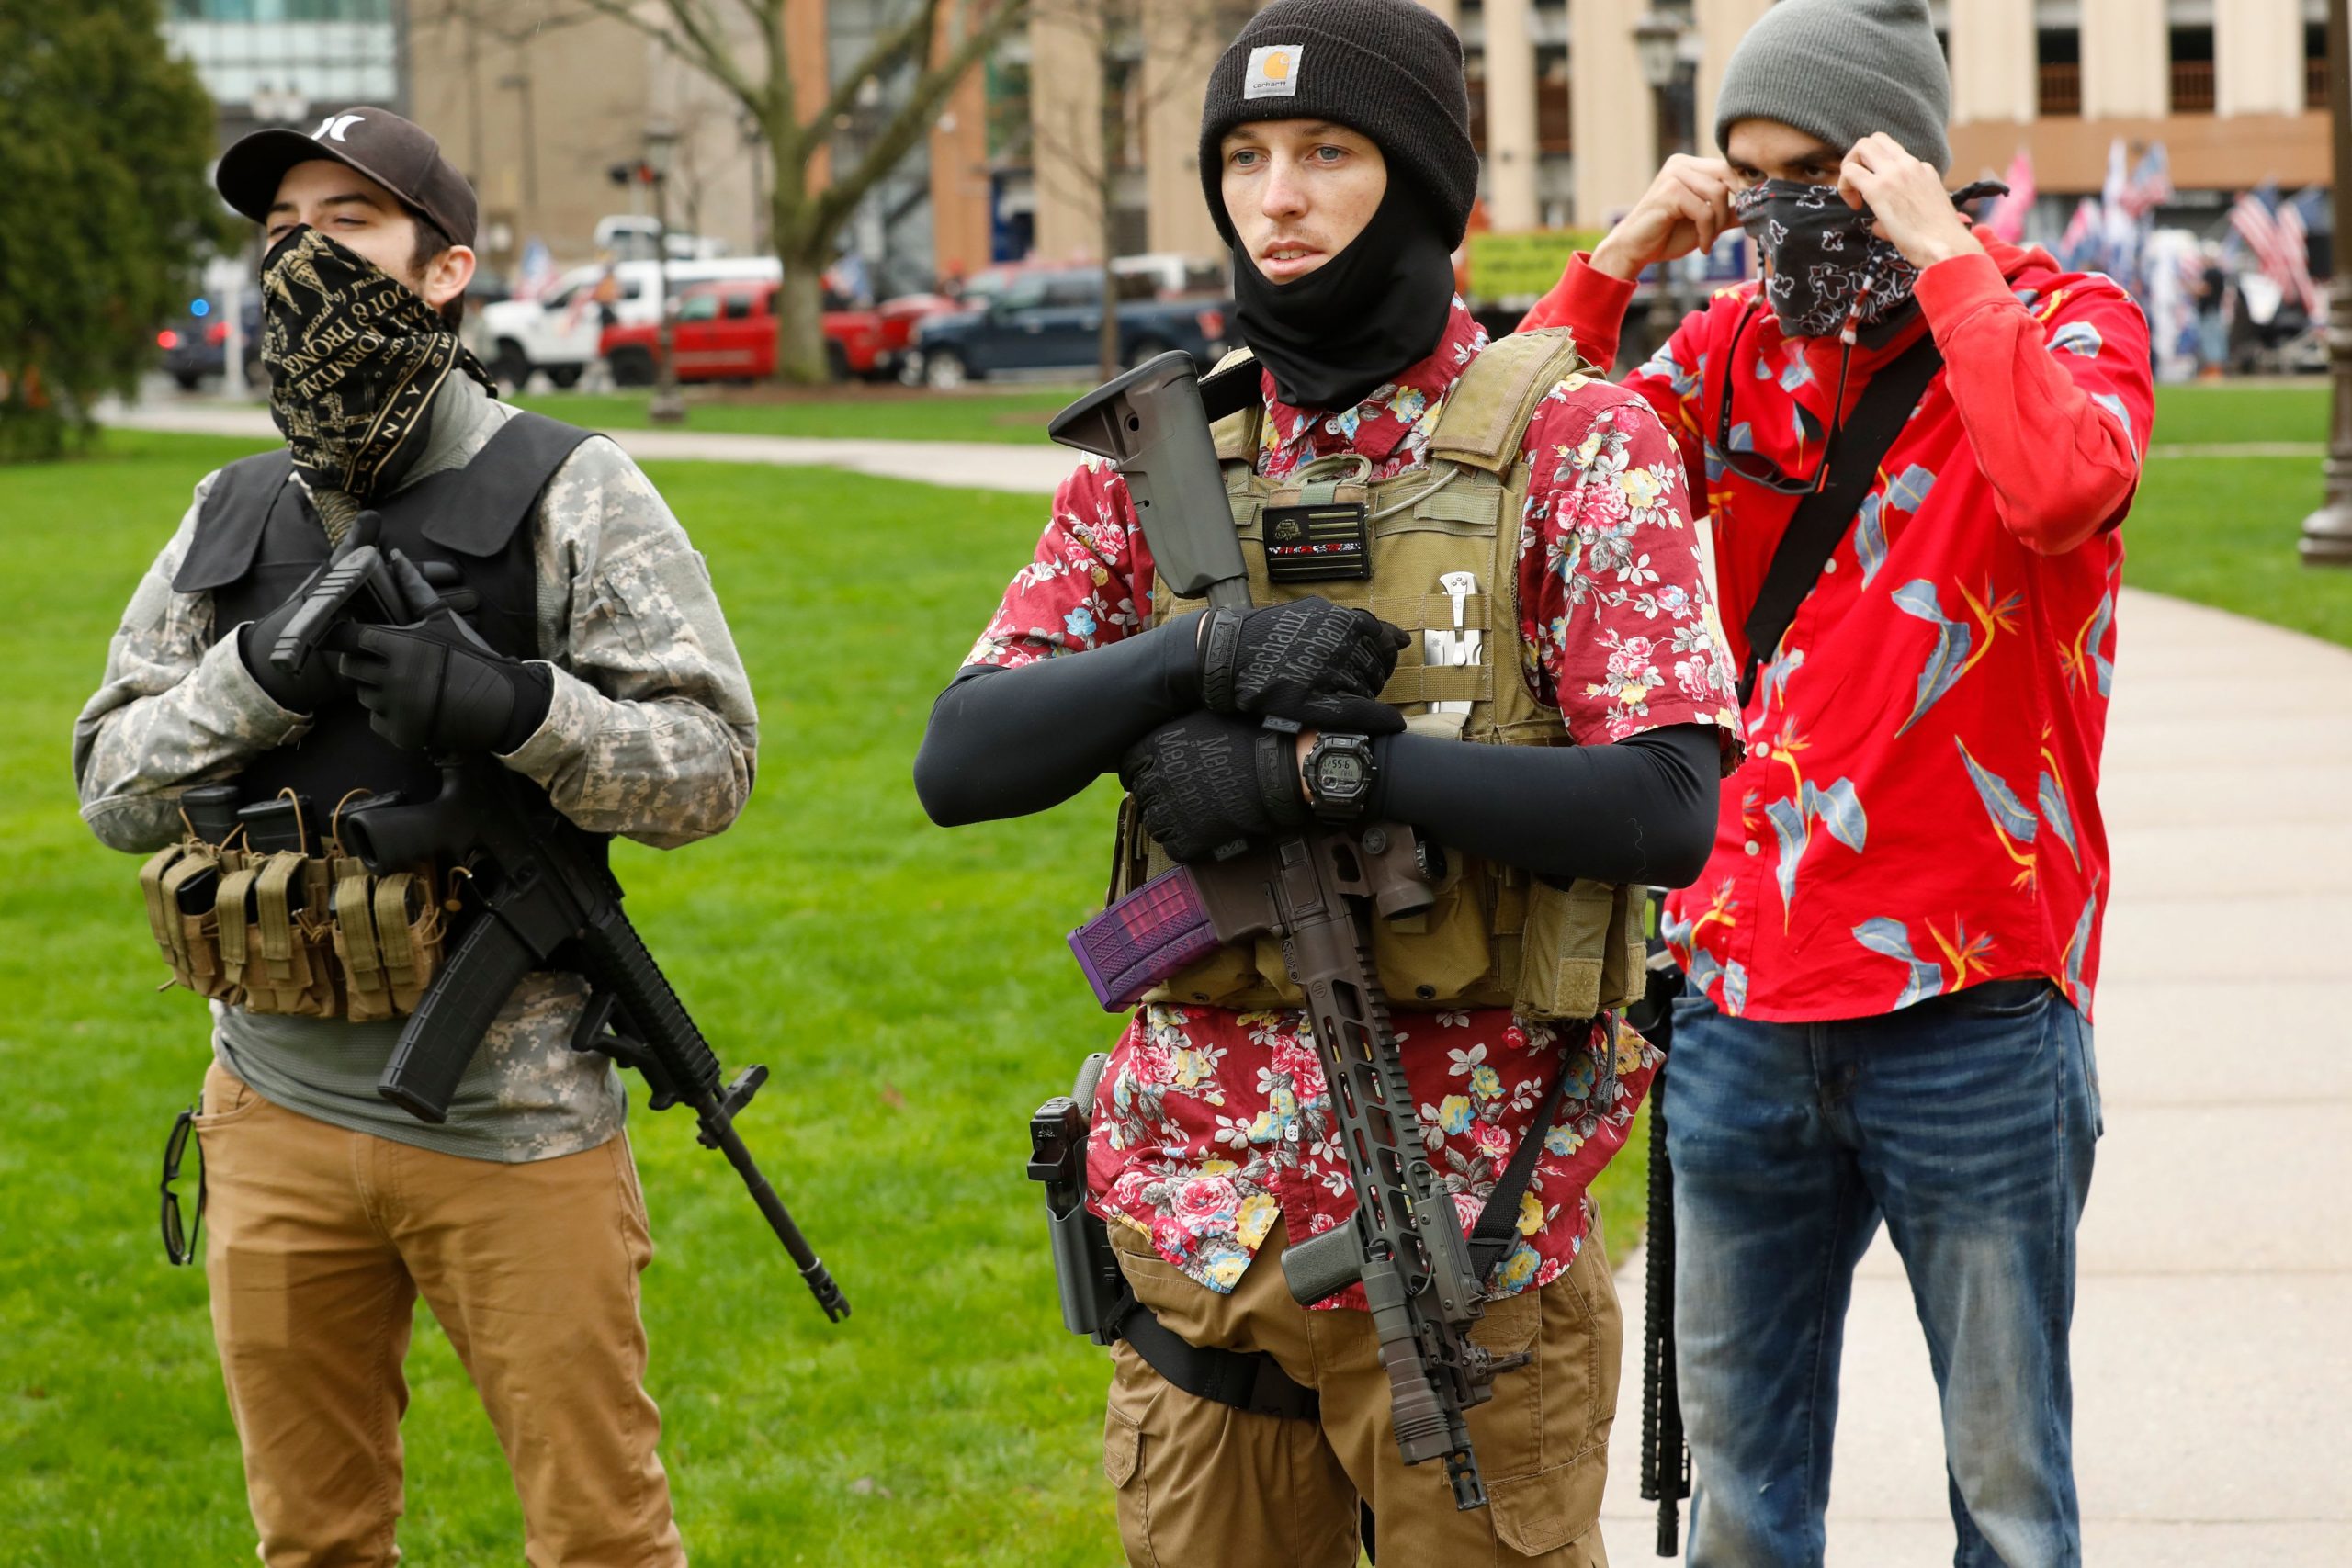 Michigan bans gun open carry at Election Day polling locations after Whitmer kidnap plot